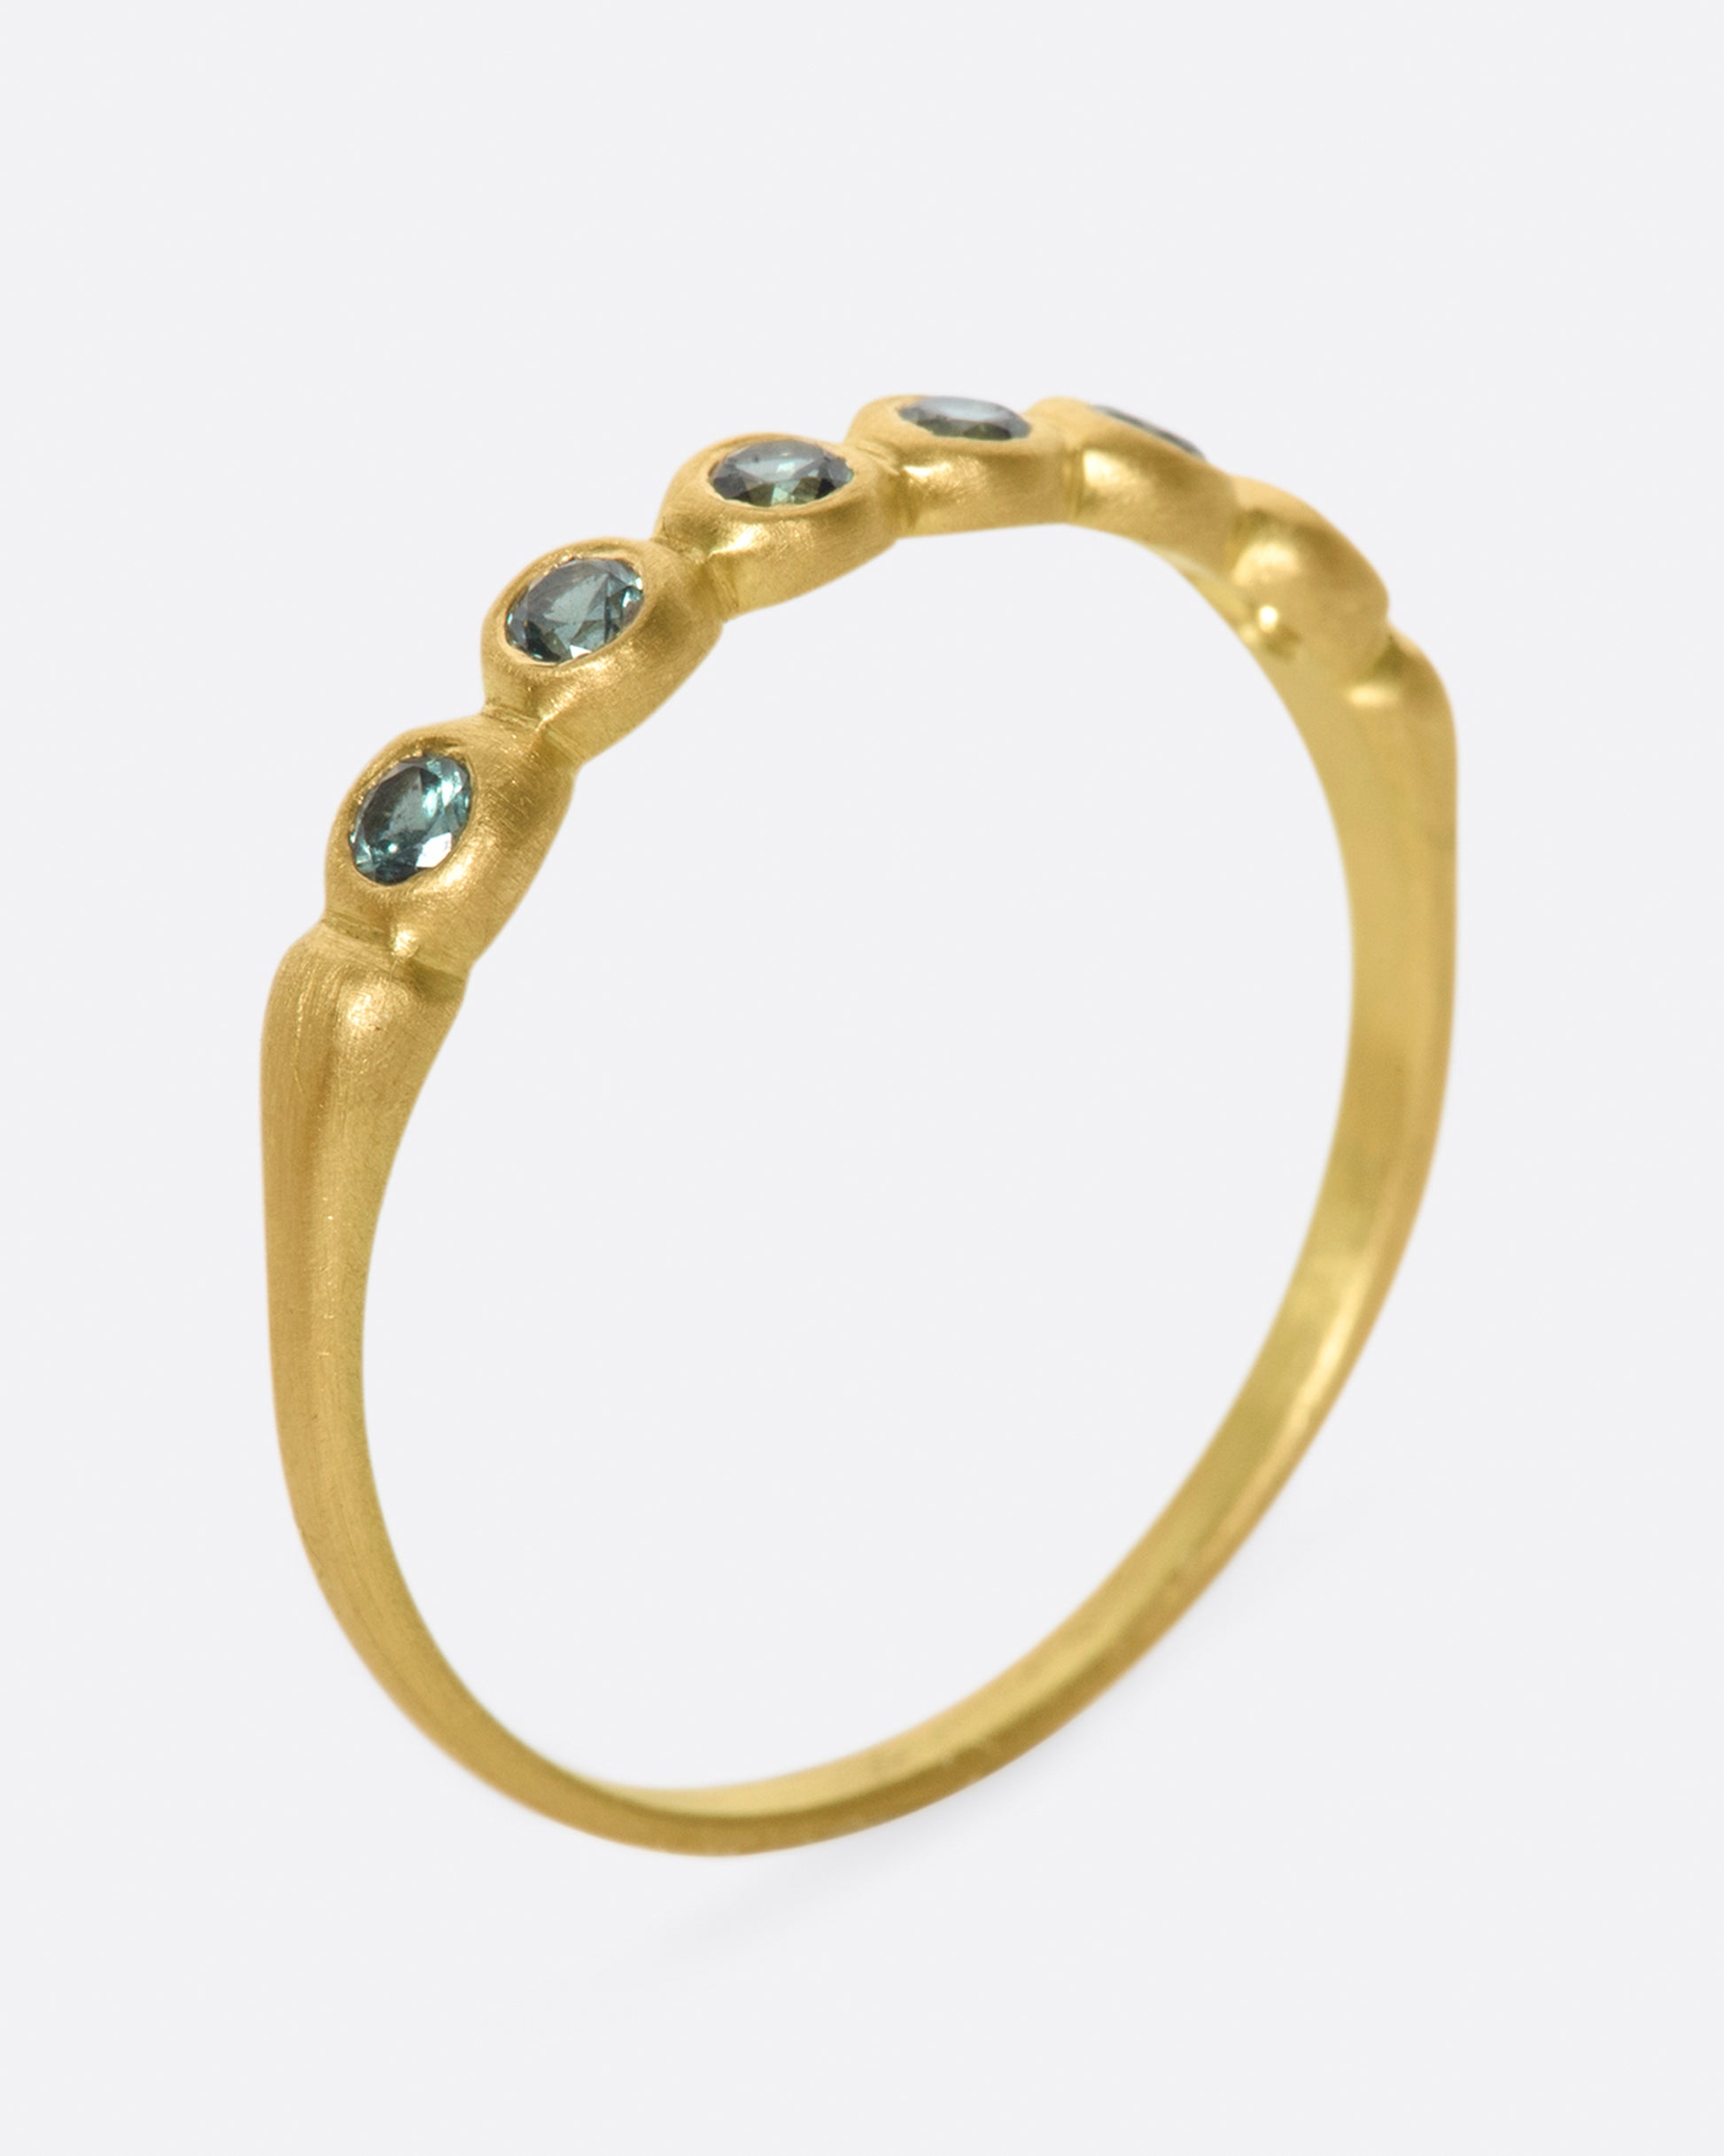 A matte gold band with teal green sapphires almost halfway around.